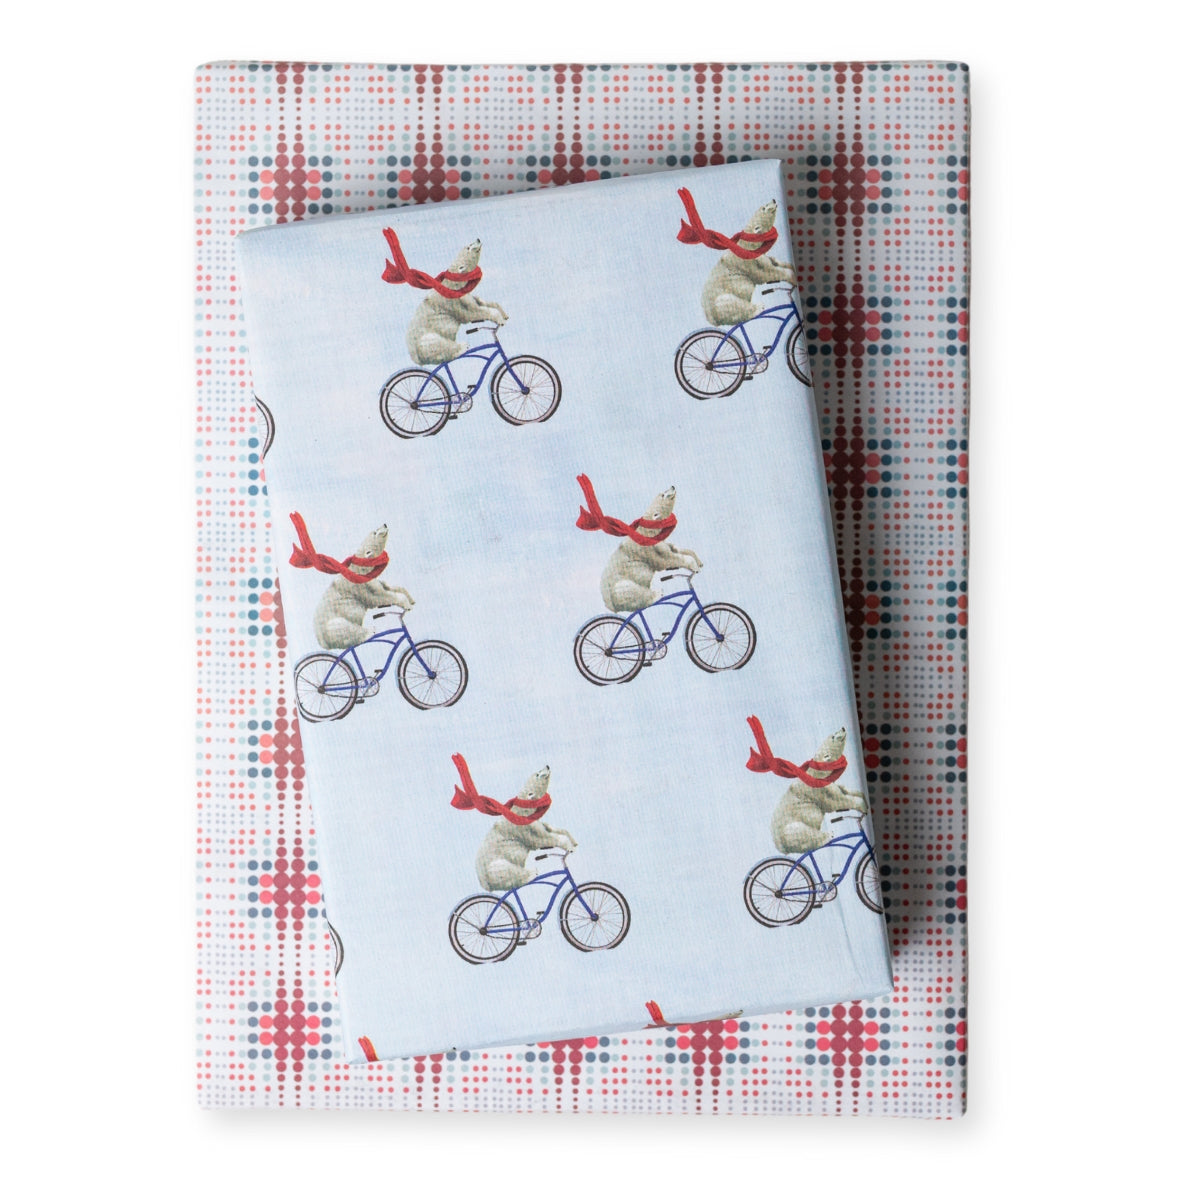 Polar Bear in Red Scarf Eco Holiday Gift Wrapping Paper - Reversible Patterns